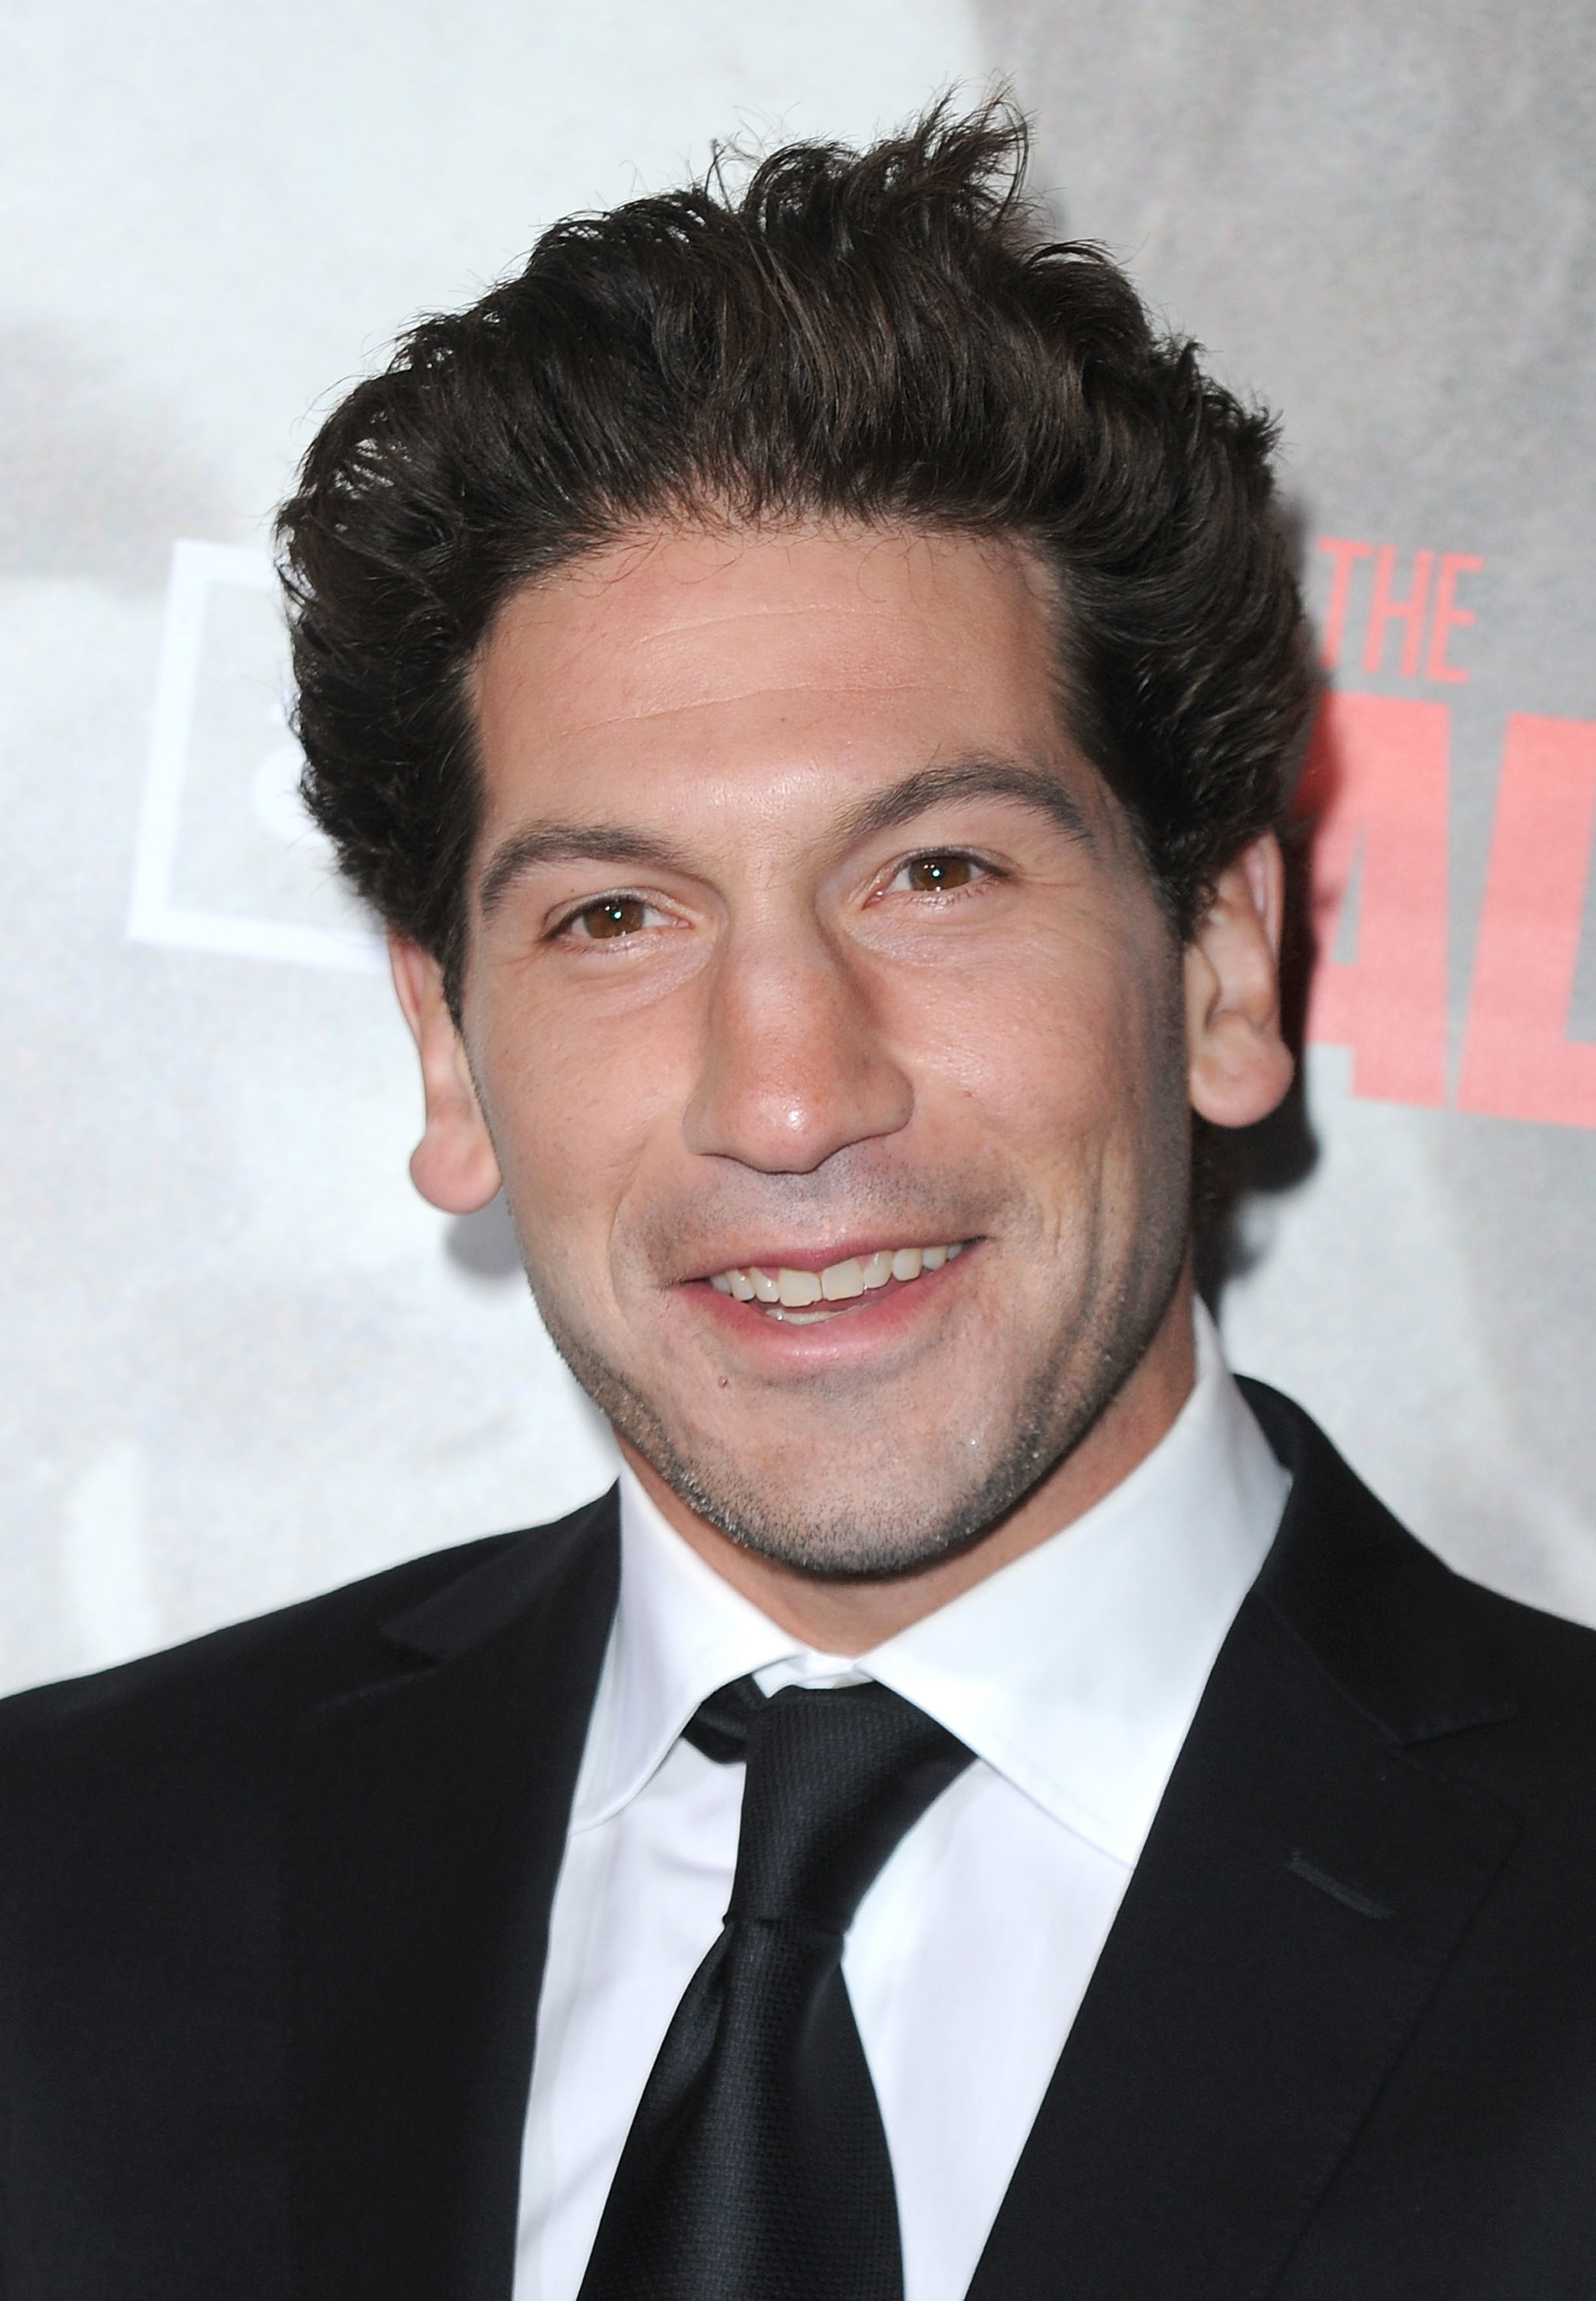 Jon Bernthal at the premiere of The Walking Dead in a suit and tie